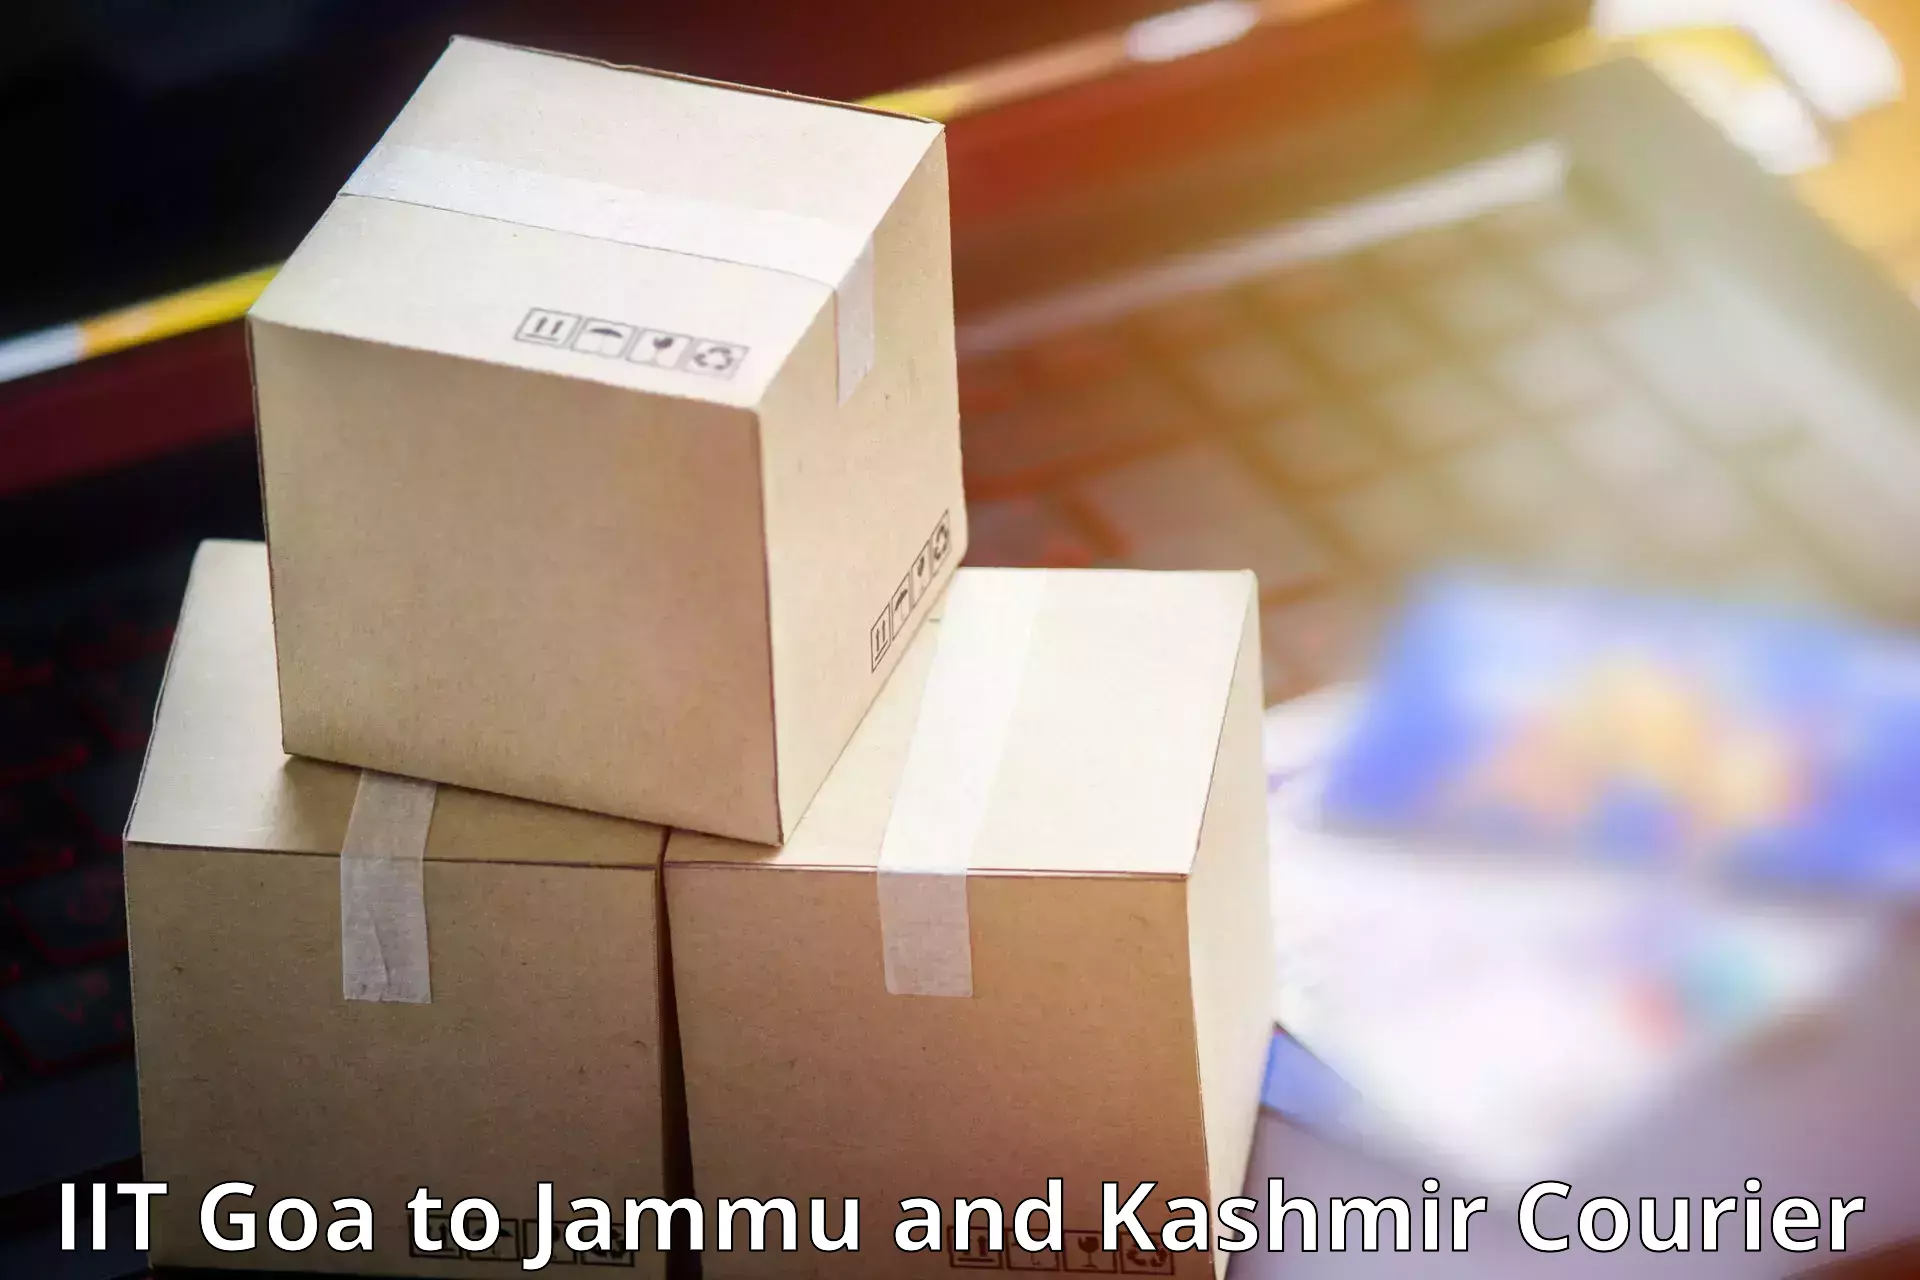 Cargo delivery service IIT Goa to Pulwama